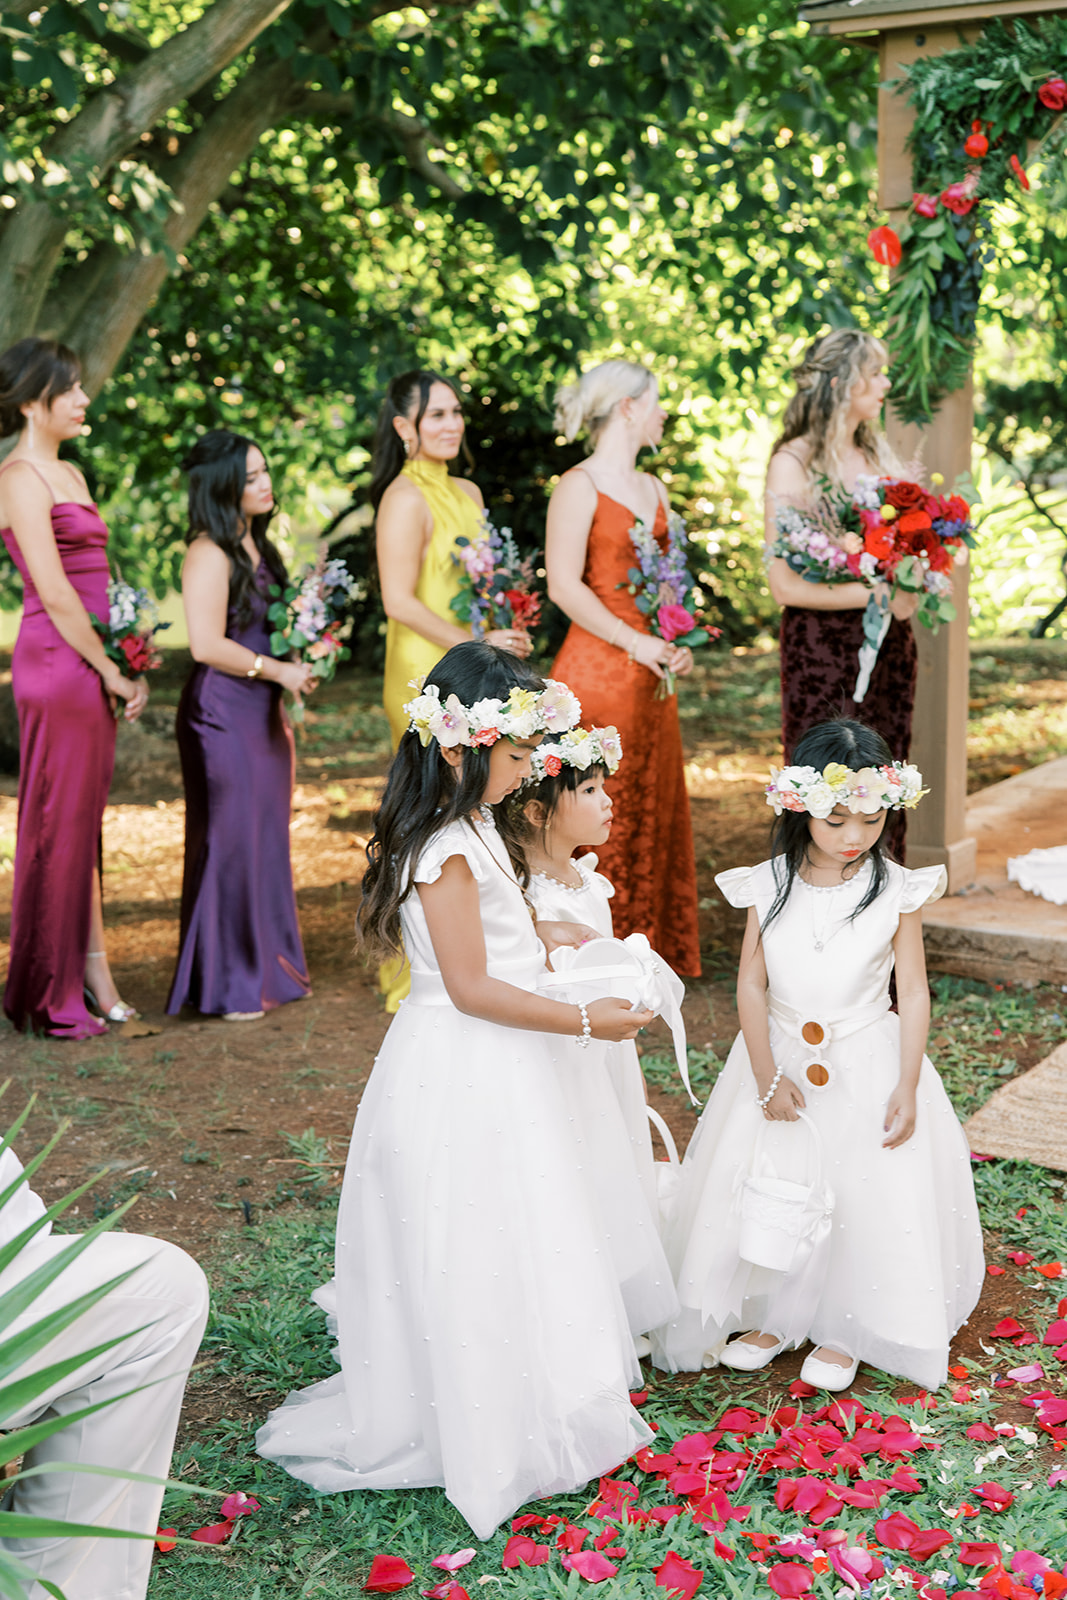 Bridesmaids and flower girls at a Hawaiian wedding ceremony, standing amidst scattered petals.